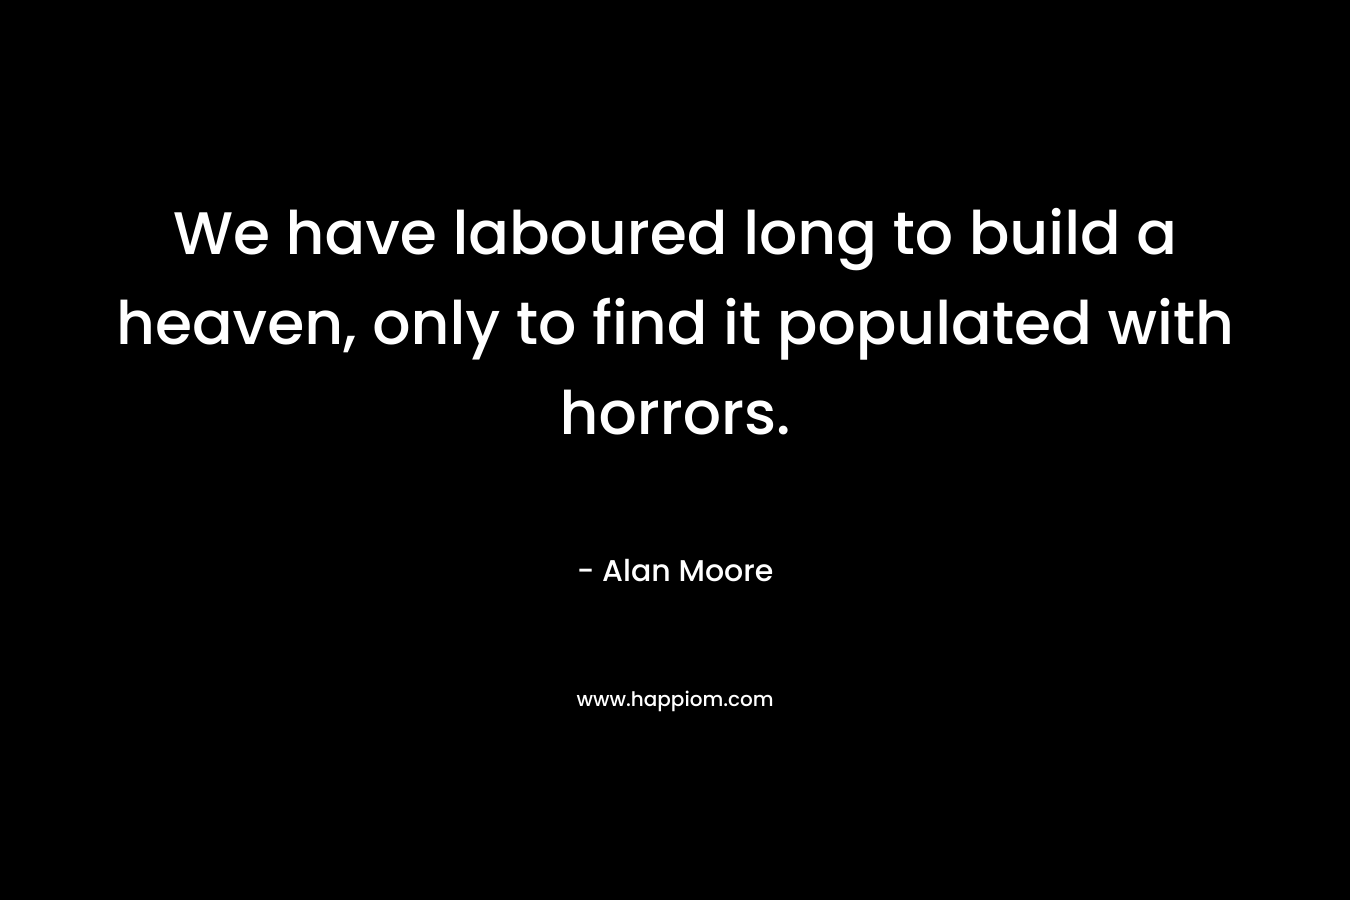 We have laboured long to build a heaven, only to find it populated with horrors. – Alan Moore